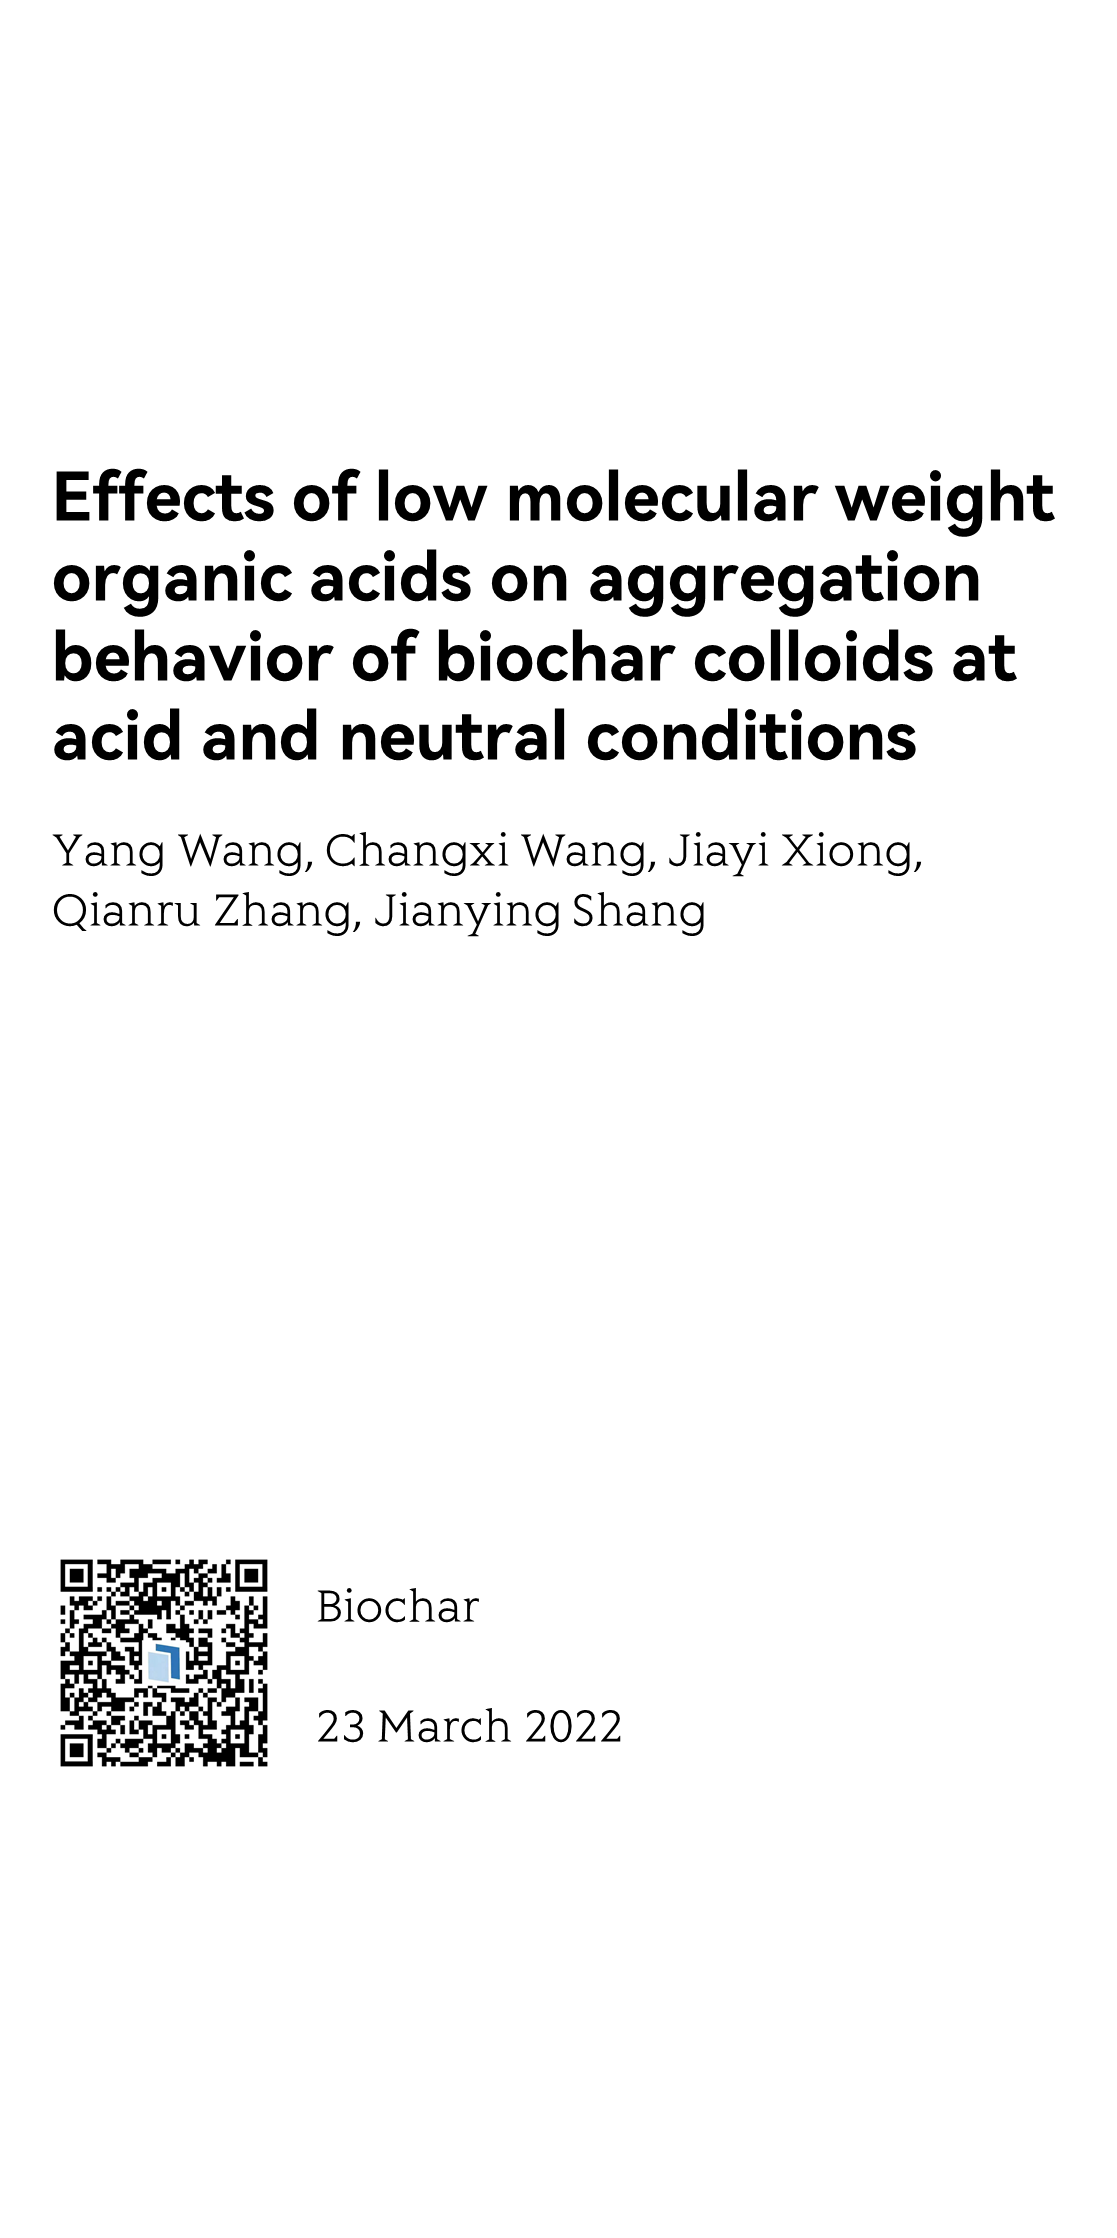 Effects of low molecular weight organic acids on aggregation behavior of biochar colloids at acid and neutral conditions_1